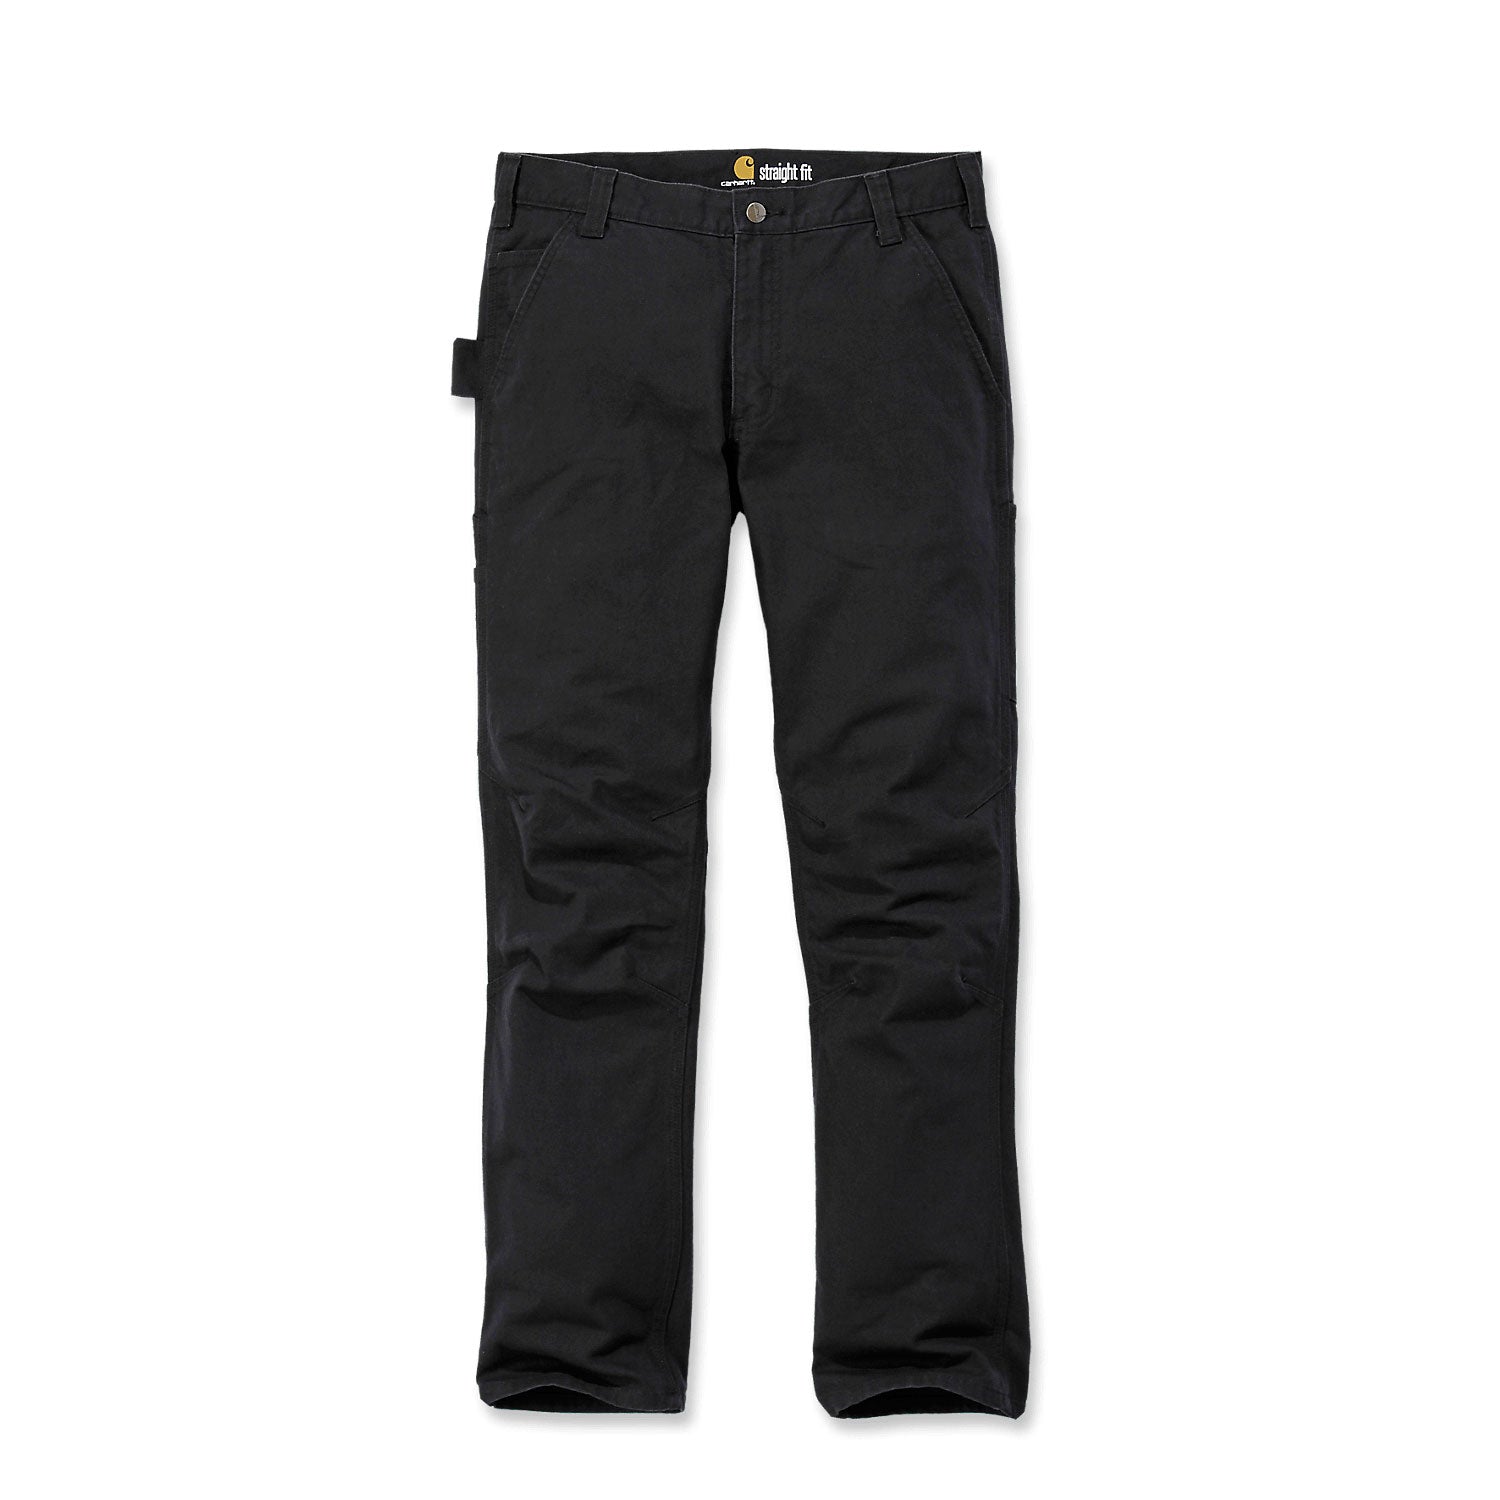 STRAIGHT FIT STRETCH DUCK DUNGAREE Black